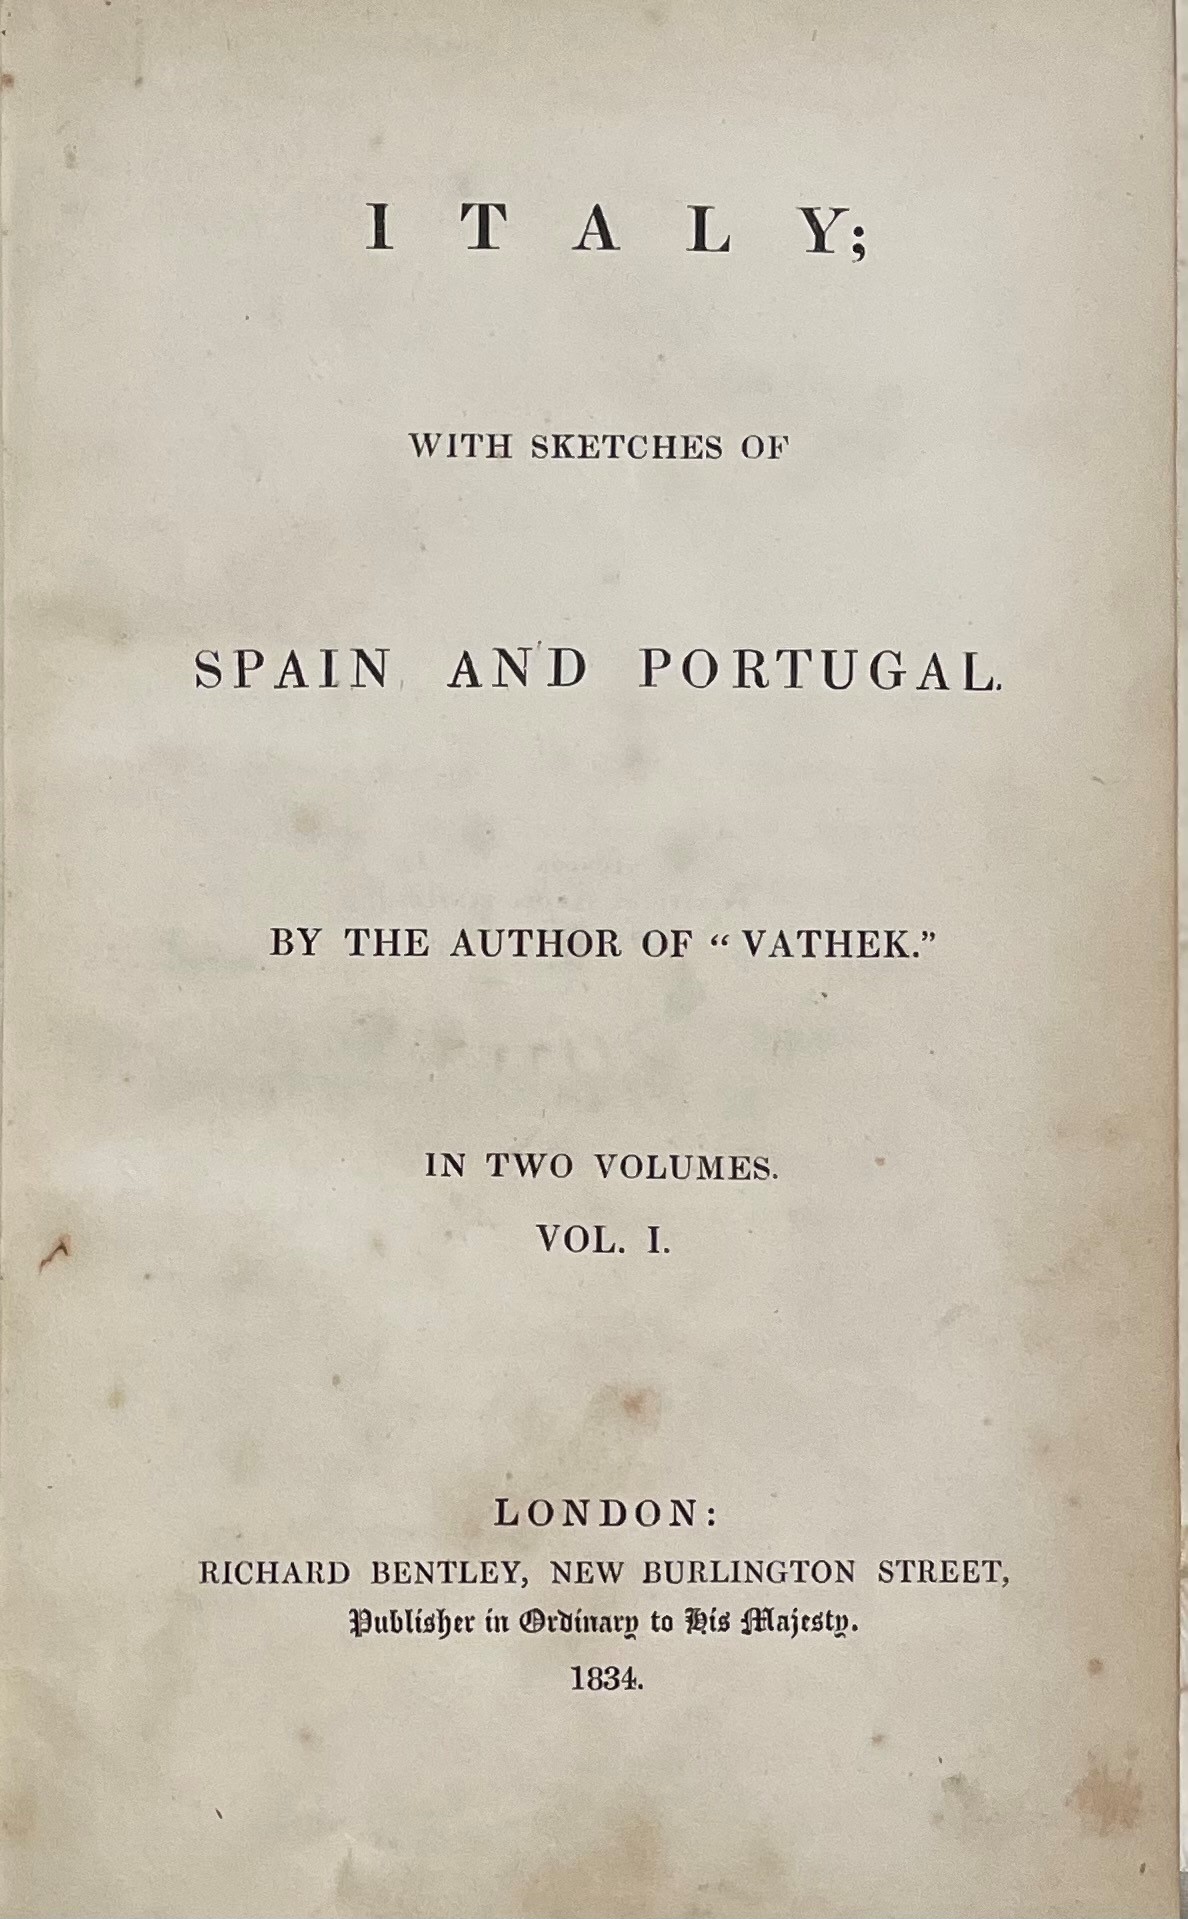 William Beckford's travels in Italy (1834) - The Devon and Exeter ...